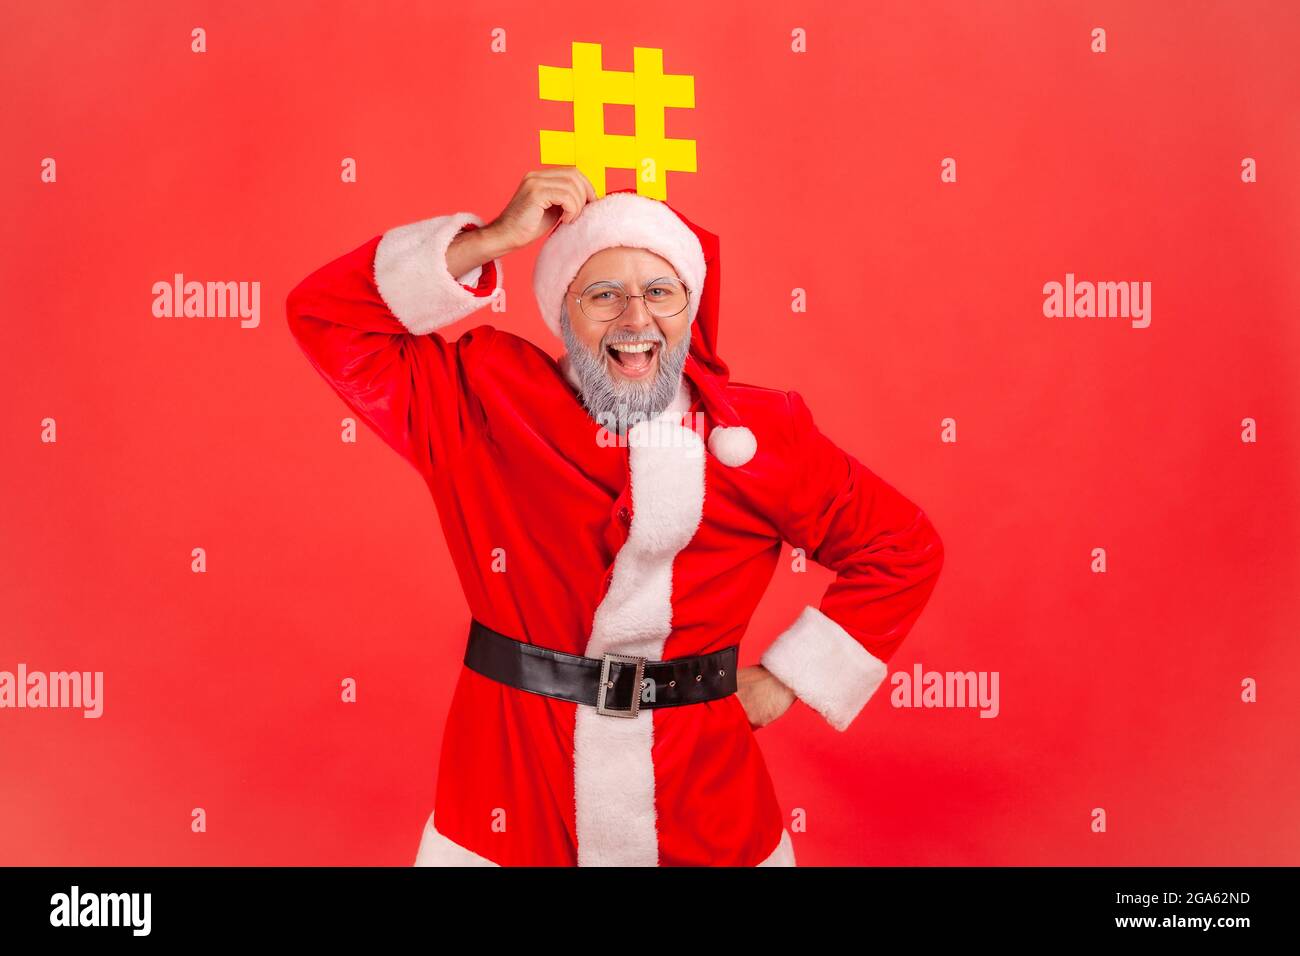 Smiling elderly man with gray beard wearing santa claus costume holding hashtag symbol over head, promoting viral topic, trendy idea, celebrating. Ind Stock Photo